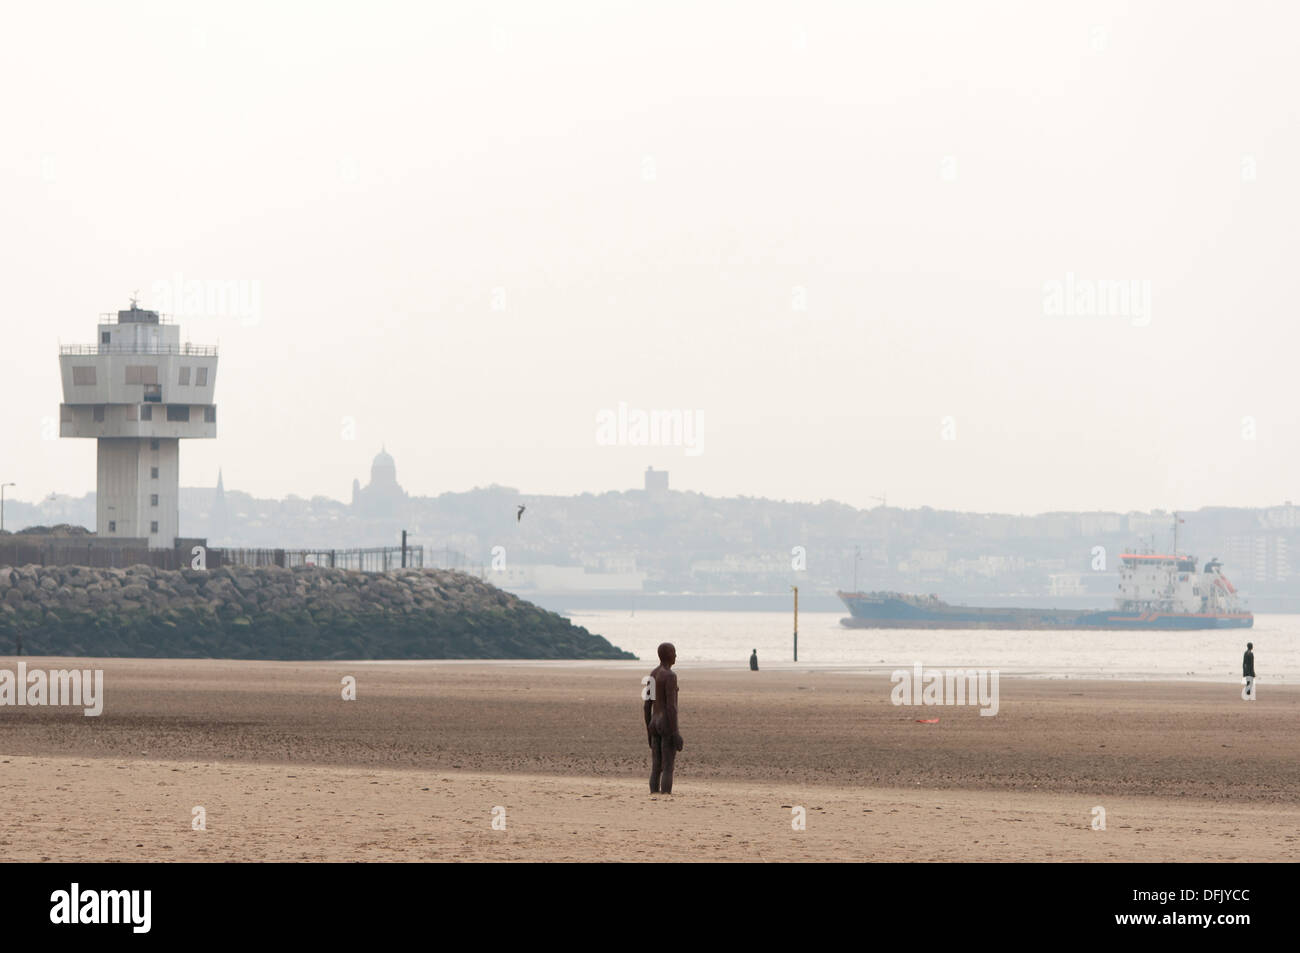 Crosby Beach sculpture by Antony Gormley Another Place Mersey Estuary Stock Photo